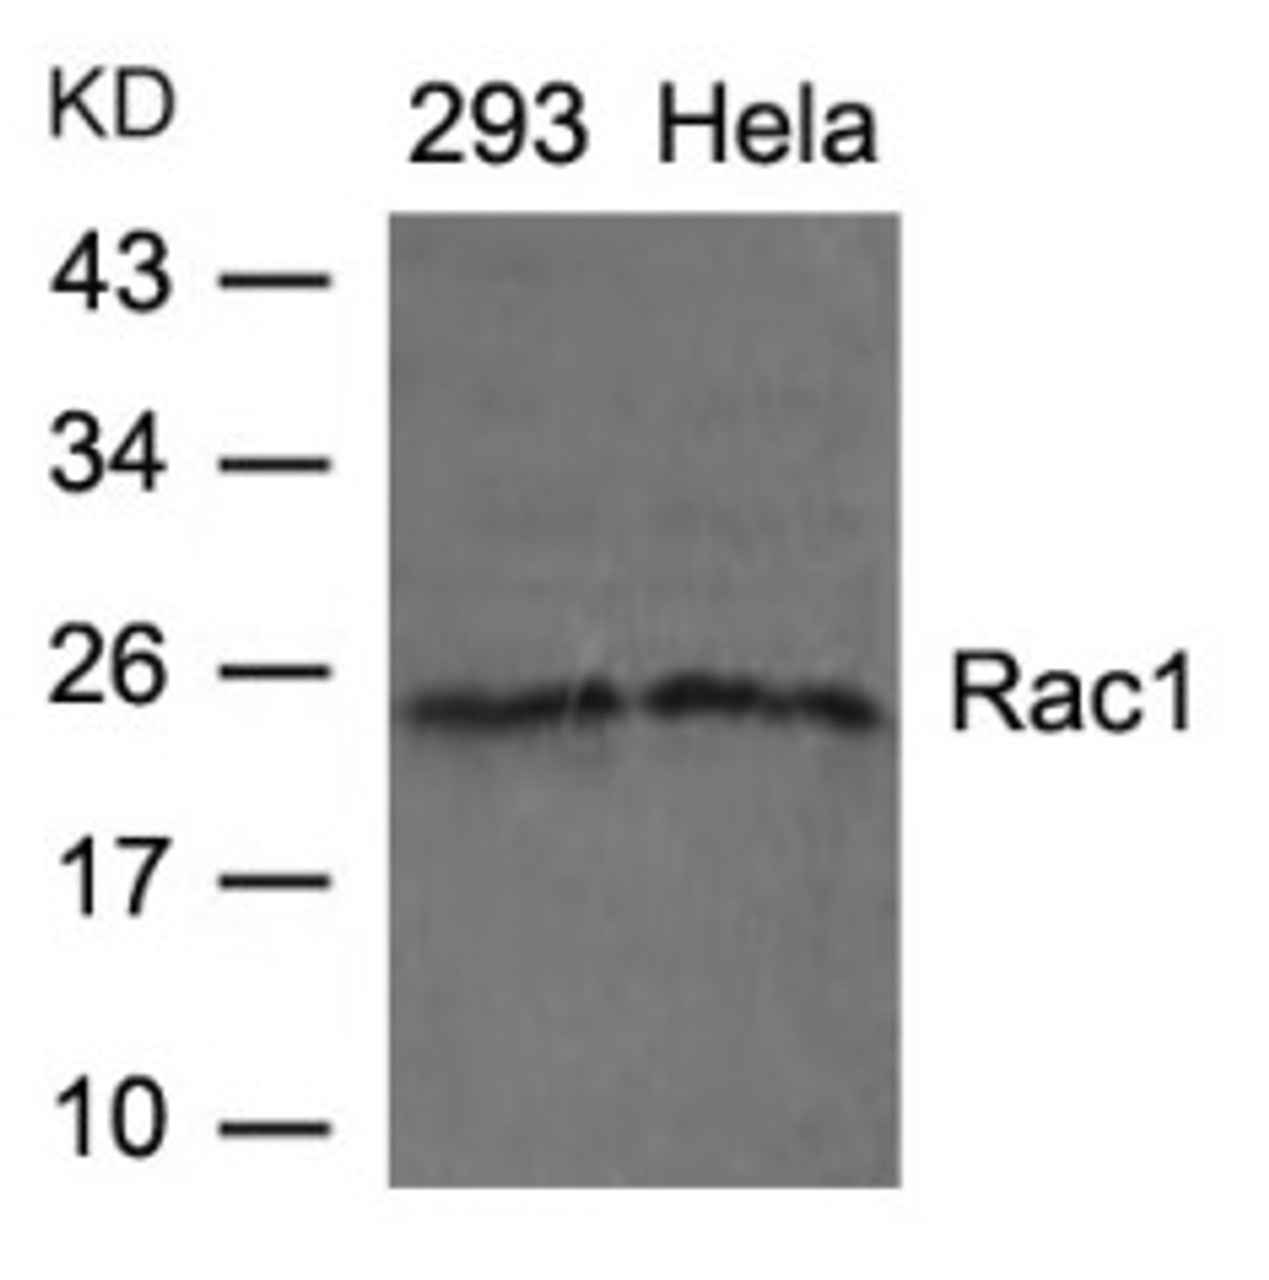 Western blot analysis of lysed extracts from 293 and HeLa cells using Rac1 (Ab-71) .